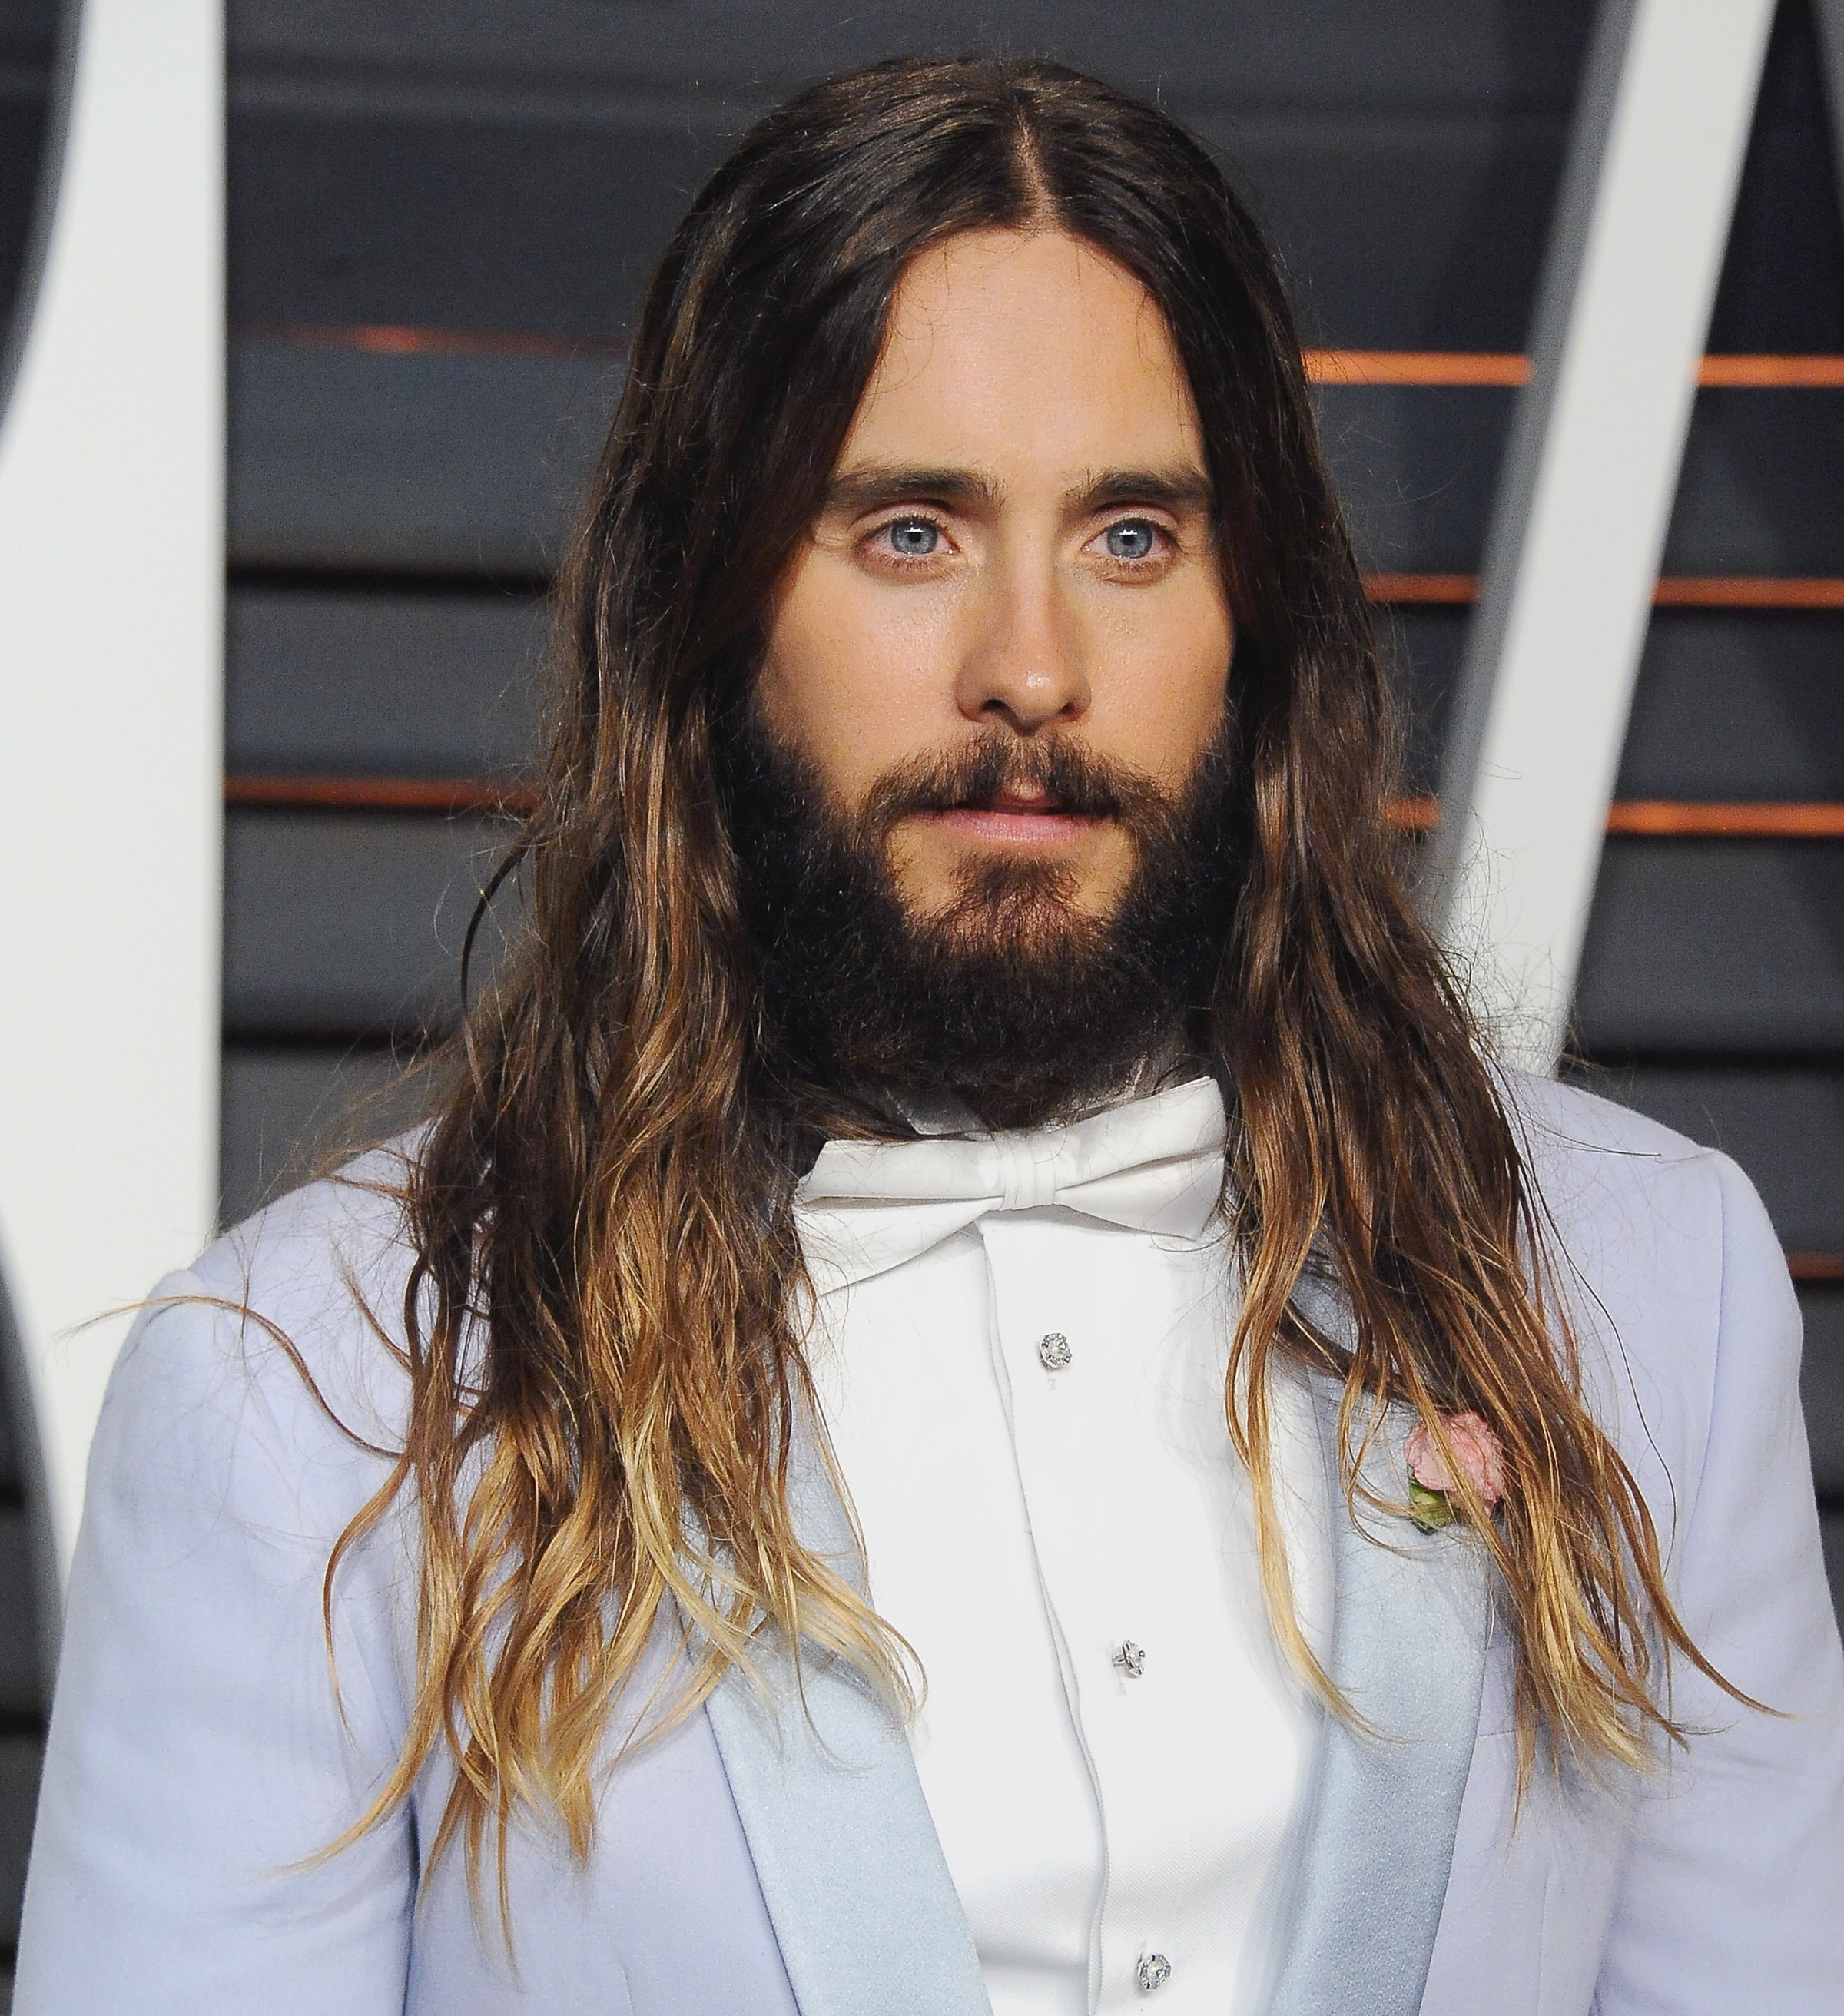 Jared Leto arrives at the 2015 Vanity Fair Oscar Party Hosted By Graydon Carter in Beverly Hills, Calif. on Feb. 22, 2015.